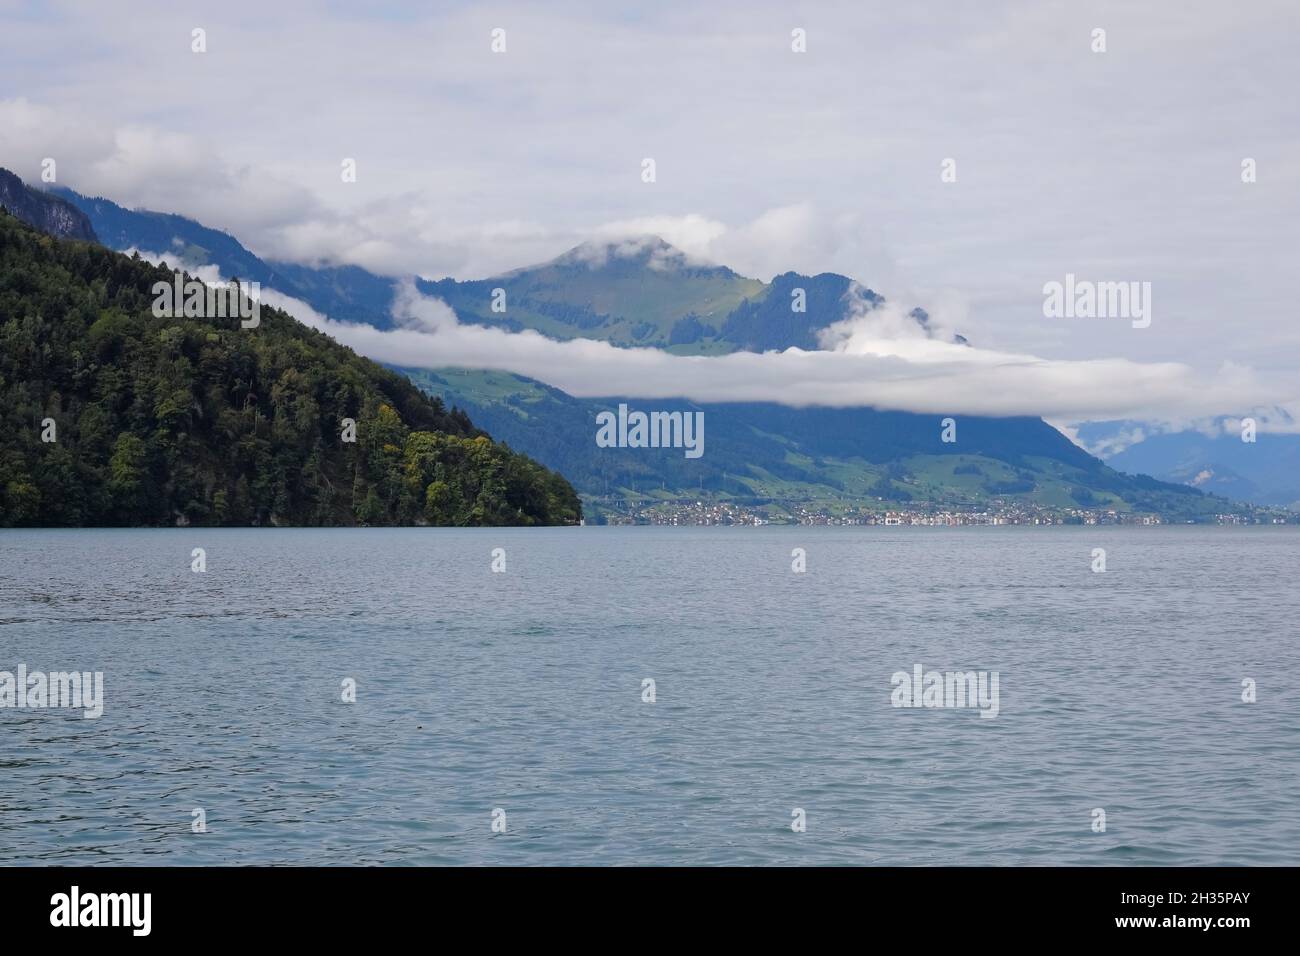 The cloud is seen over the mountain landscape at Lake Lucerne in Switzerland. The small town of Beckenried is located on the lakeshore. Stock Photo